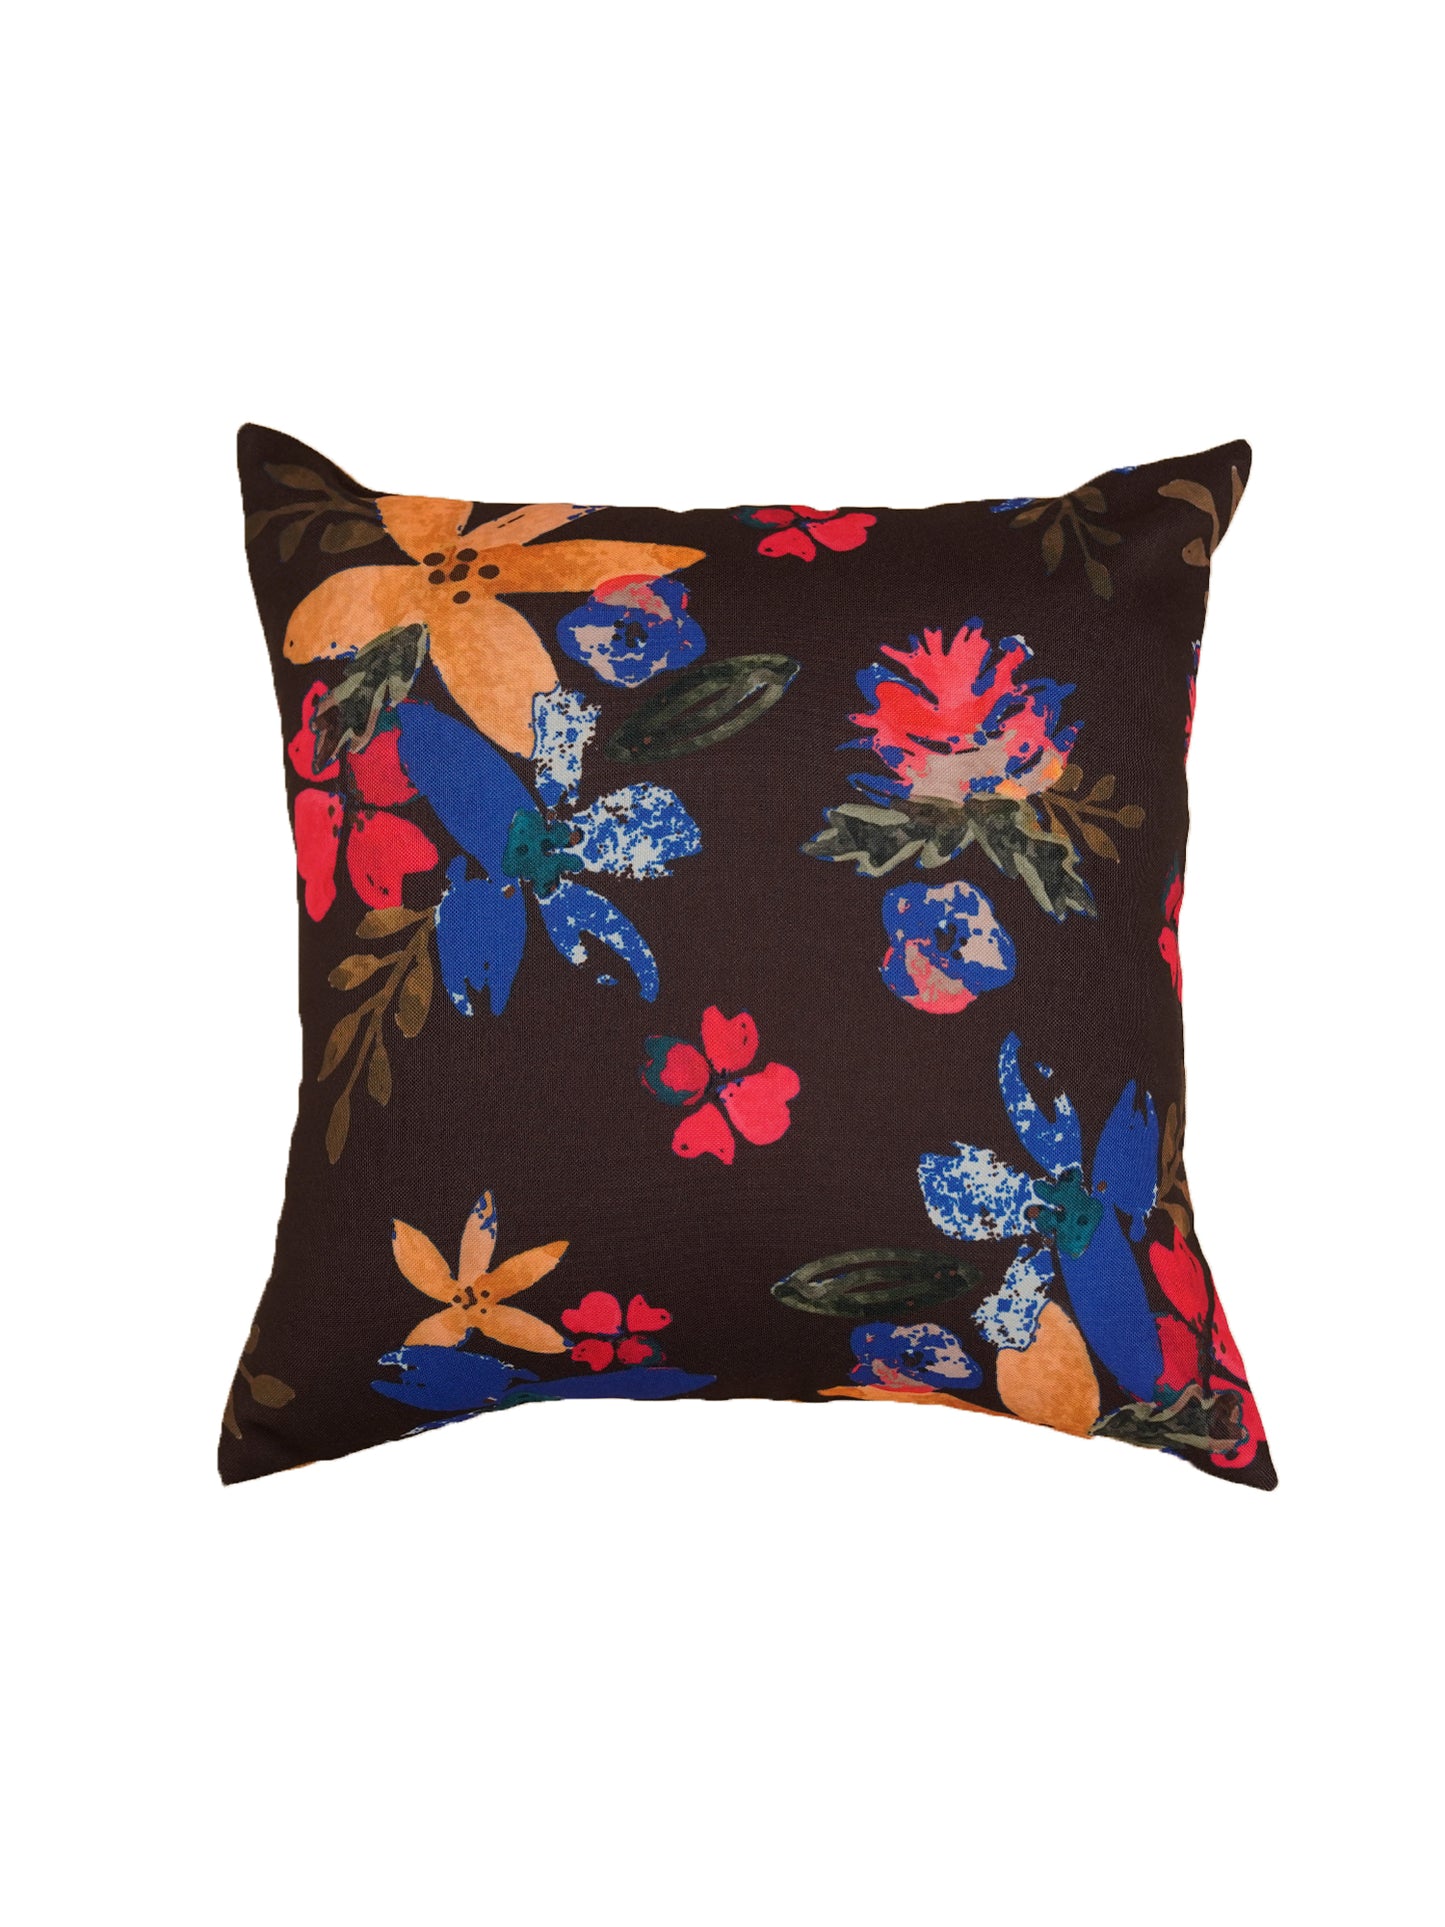 Cushion Covers Set of 3 Polycanvas Printed Floral Multi-color - 16" X 16"